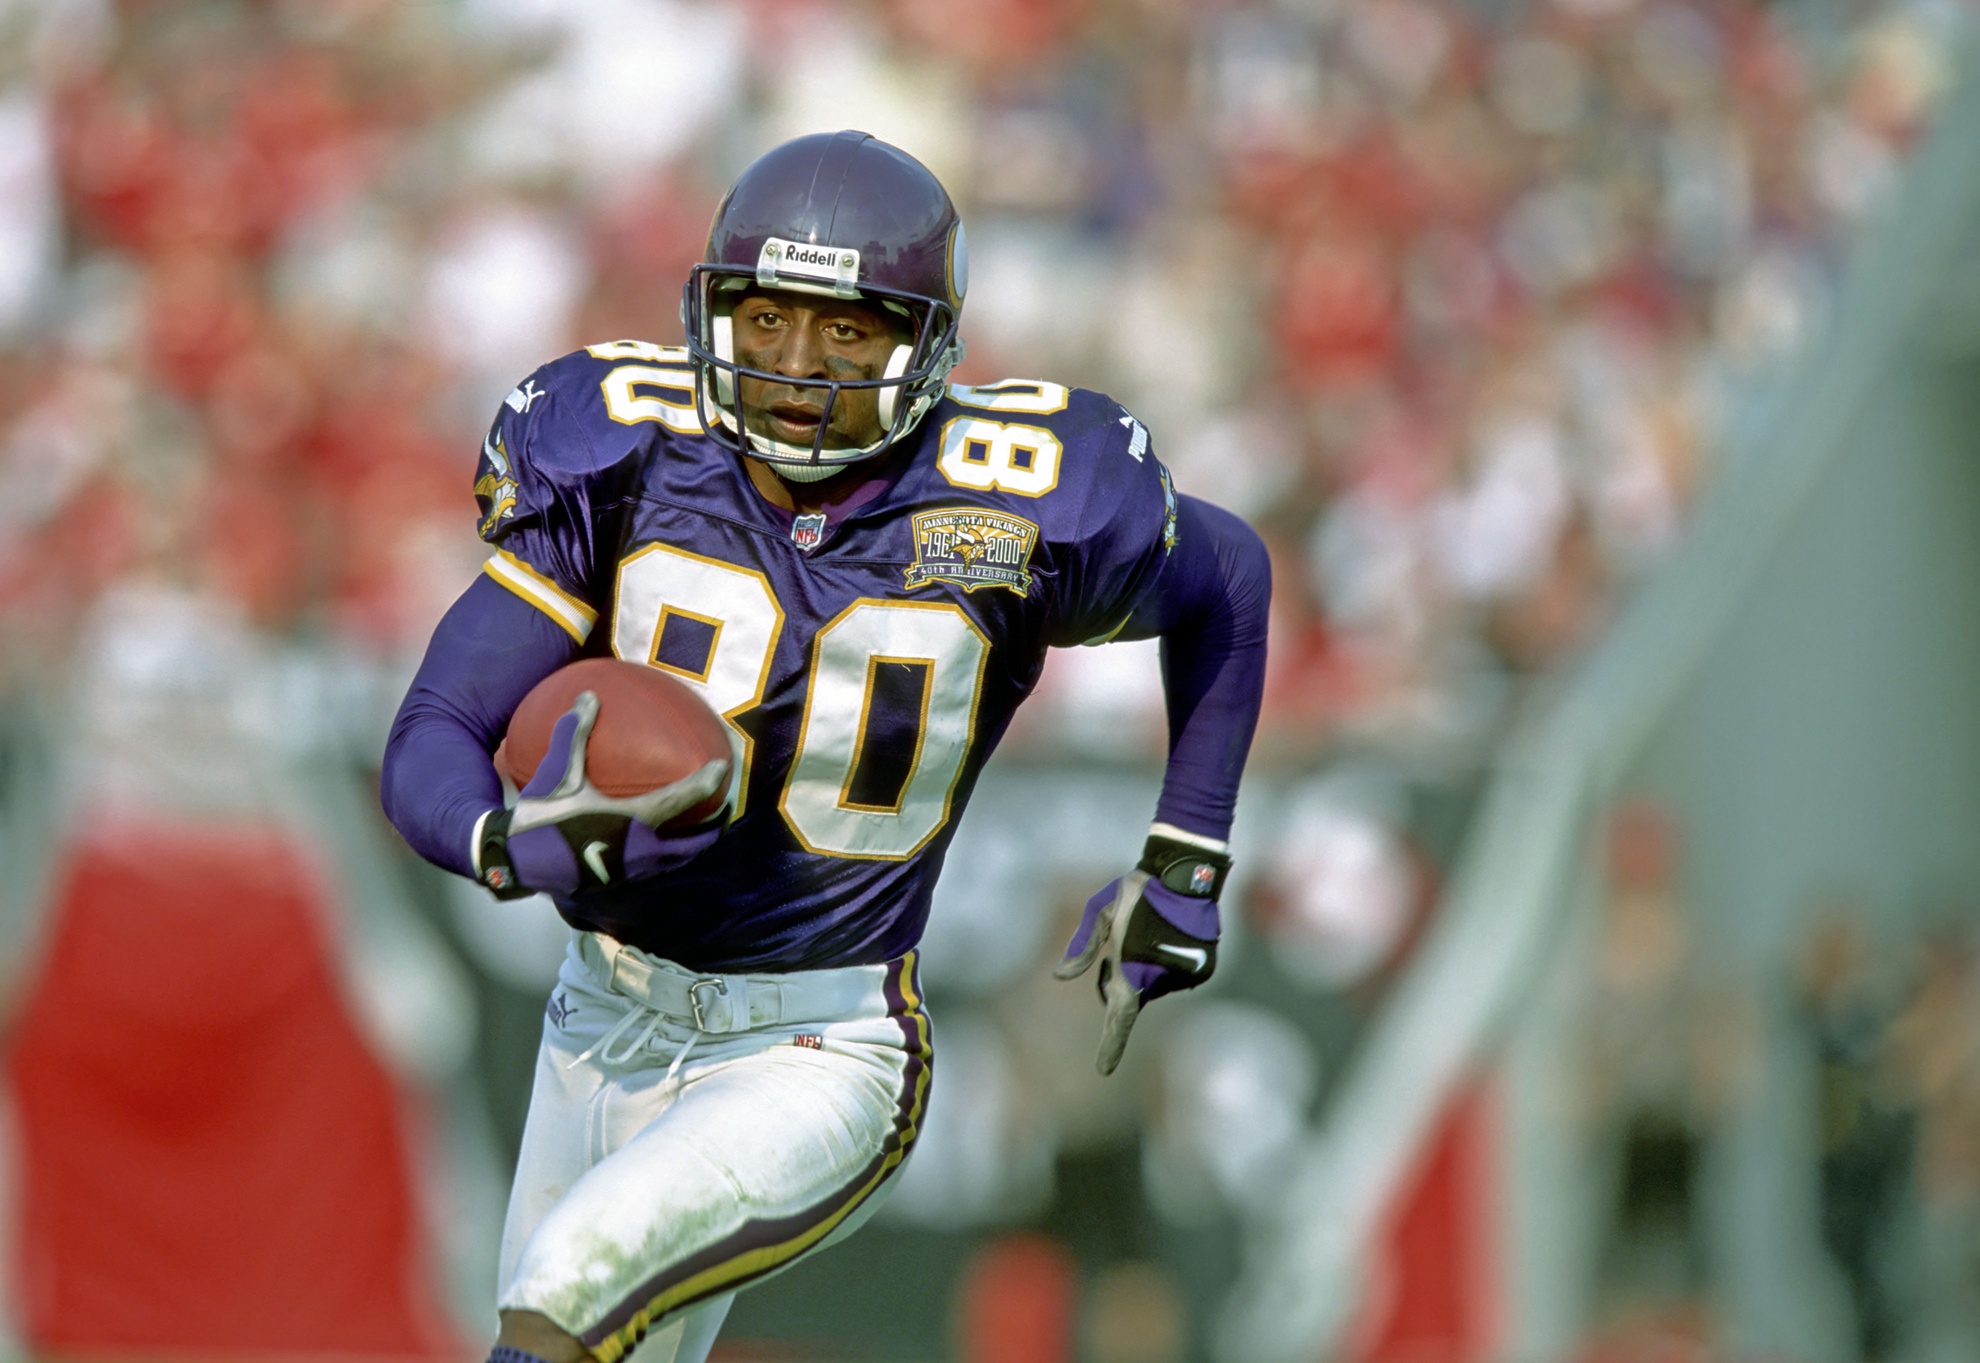 Cris Carter - All He Does is Catch TOUCHDOWNS!!! (Career